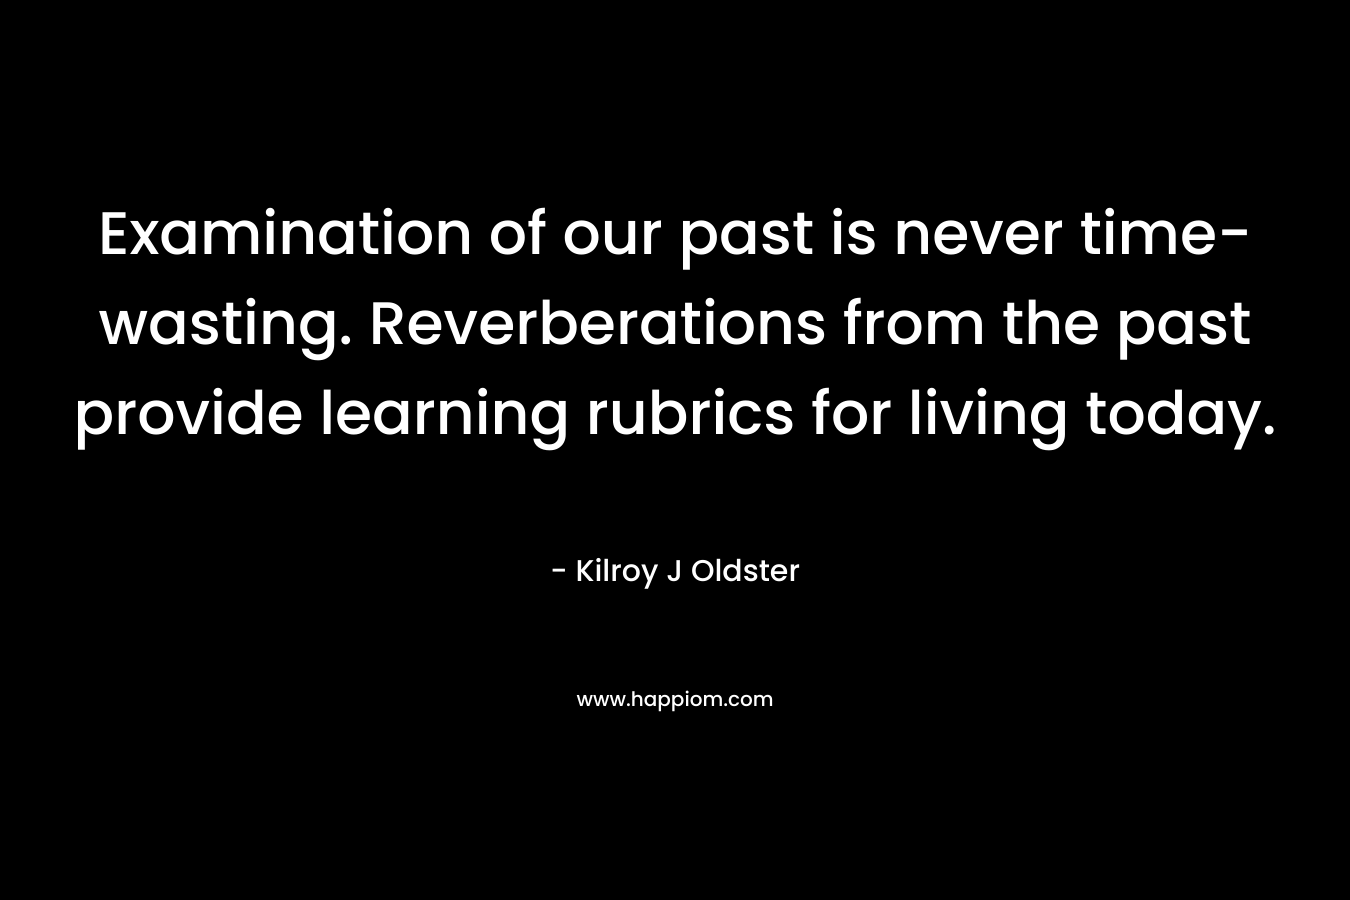 Examination of our past is never time-wasting. Reverberations from the past provide learning rubrics for living today.